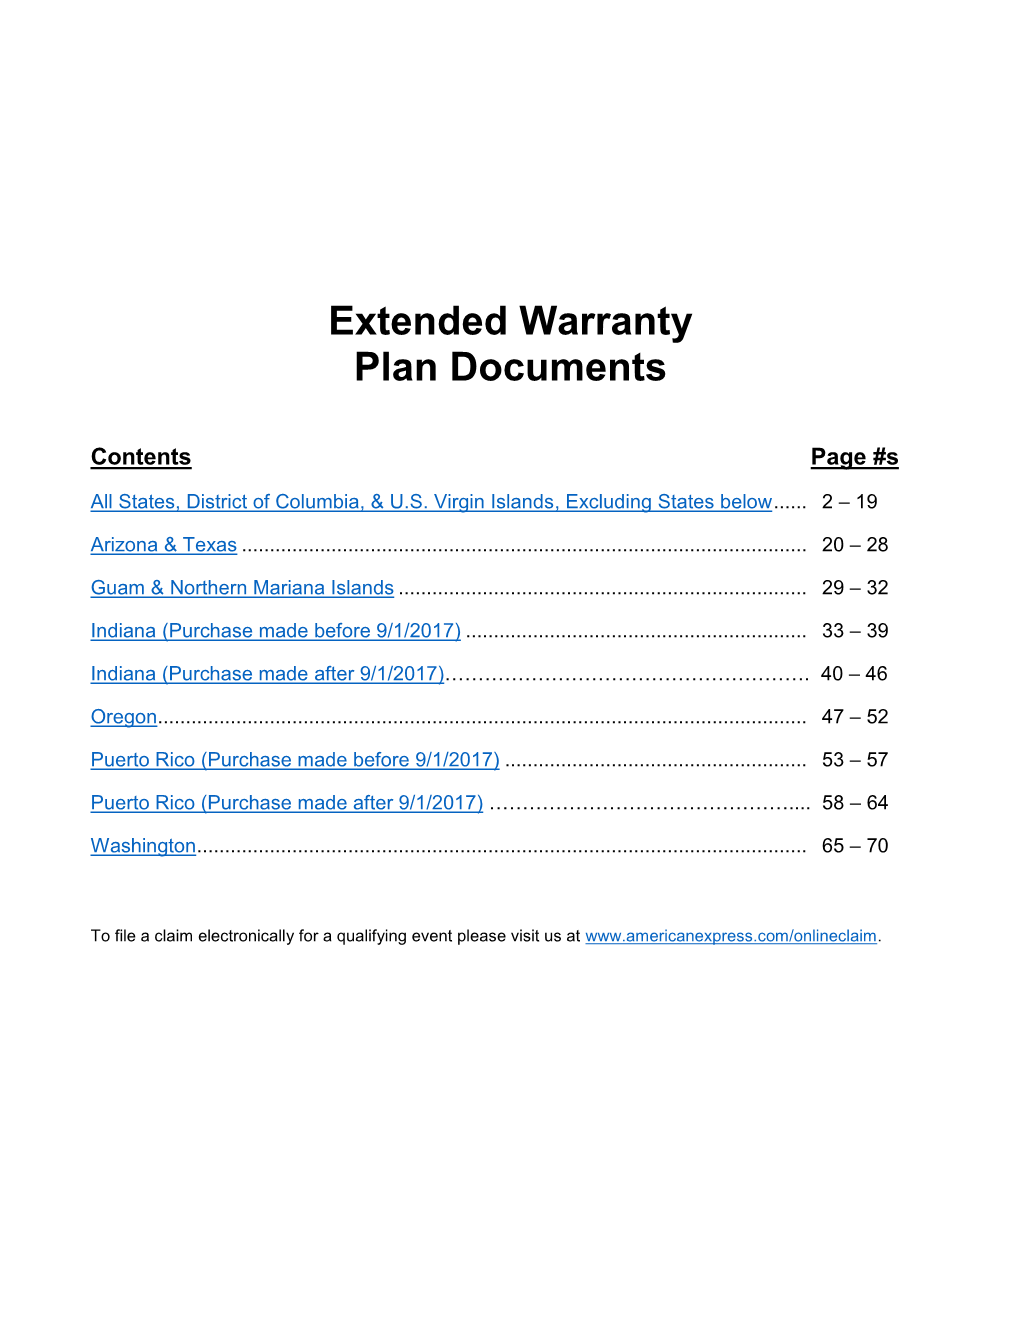 Extended Warranty Coverage